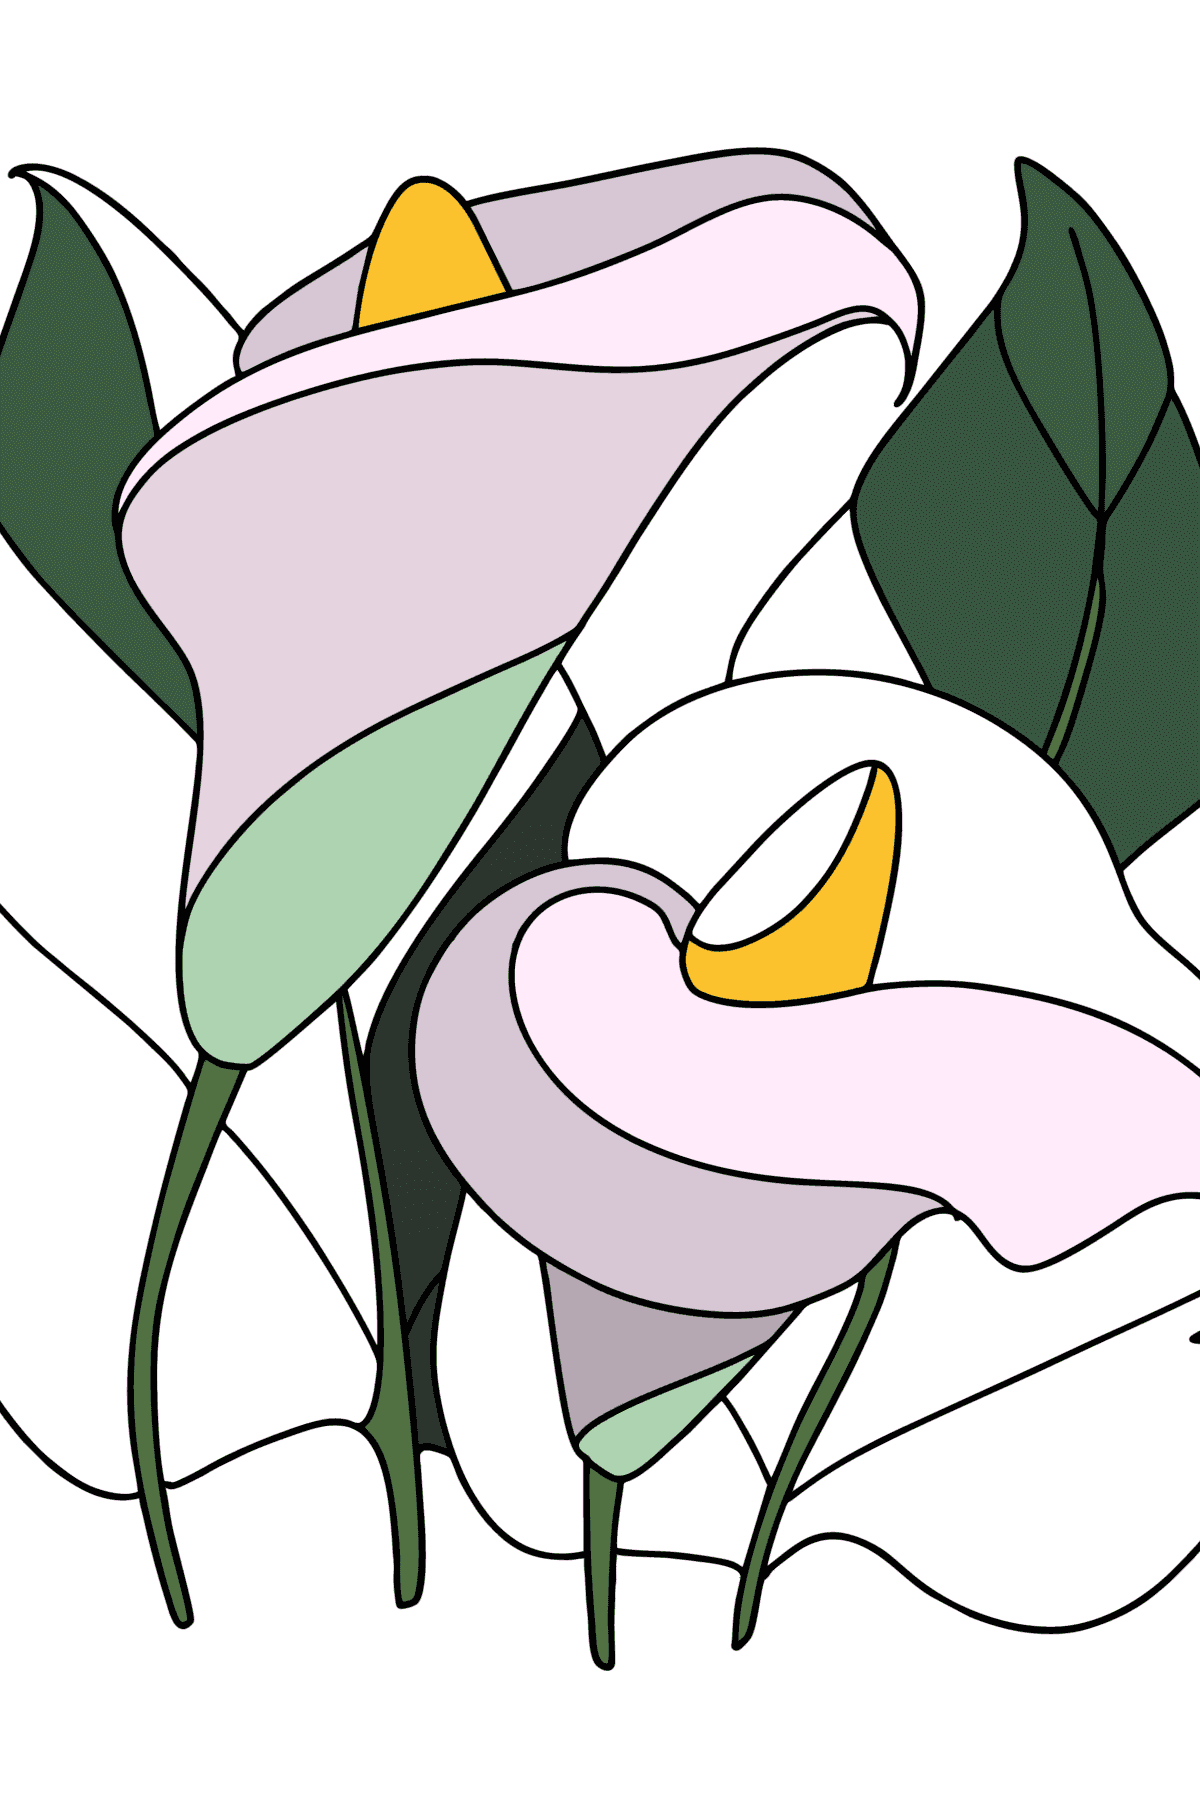 Calla coloring page - Coloring Pages for Kids